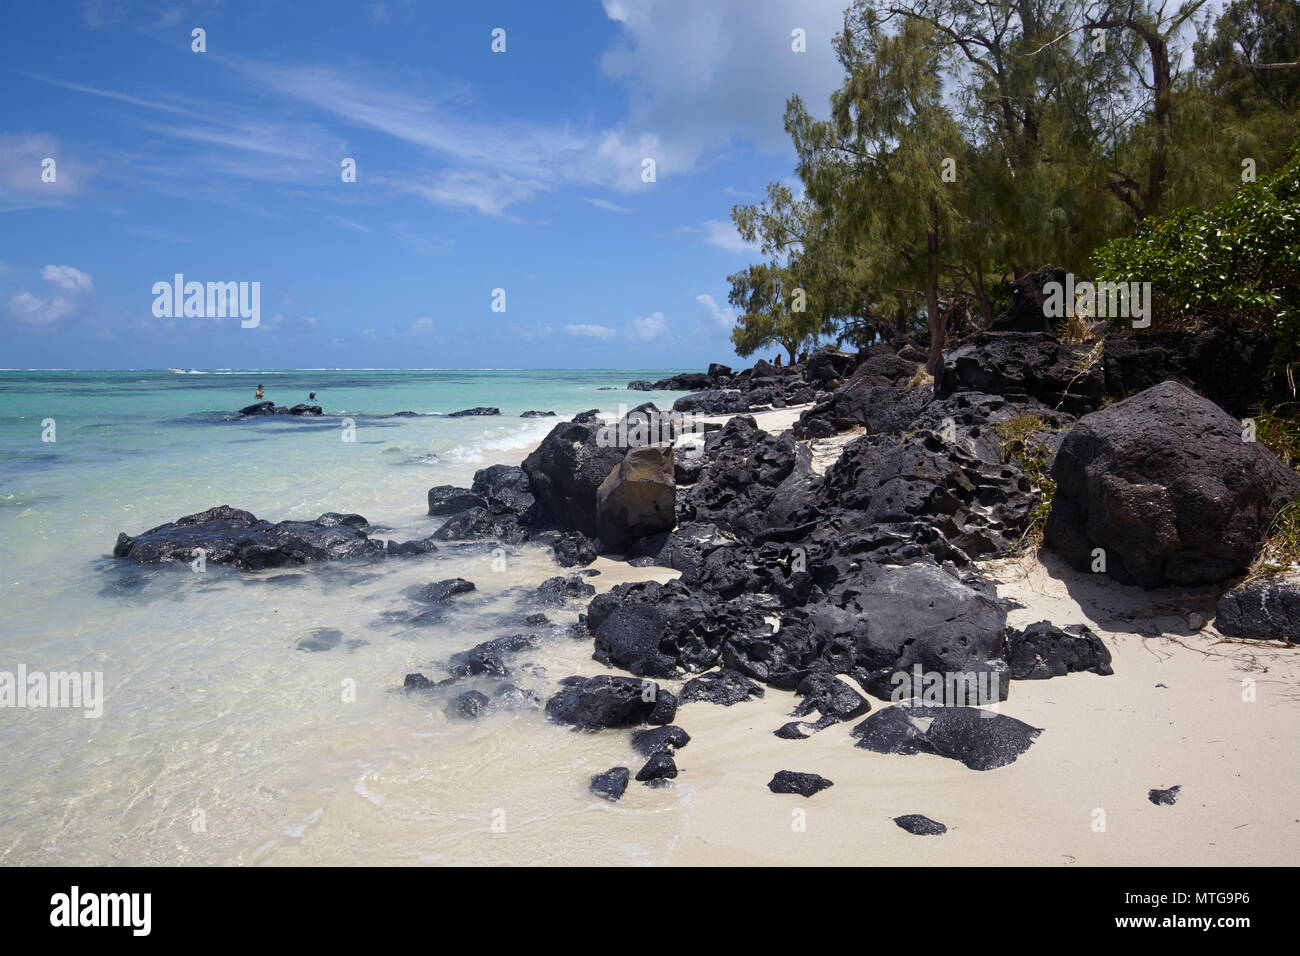 The clear water and white beaches in Ile aux Cerfs, Mauritius Stock Photo